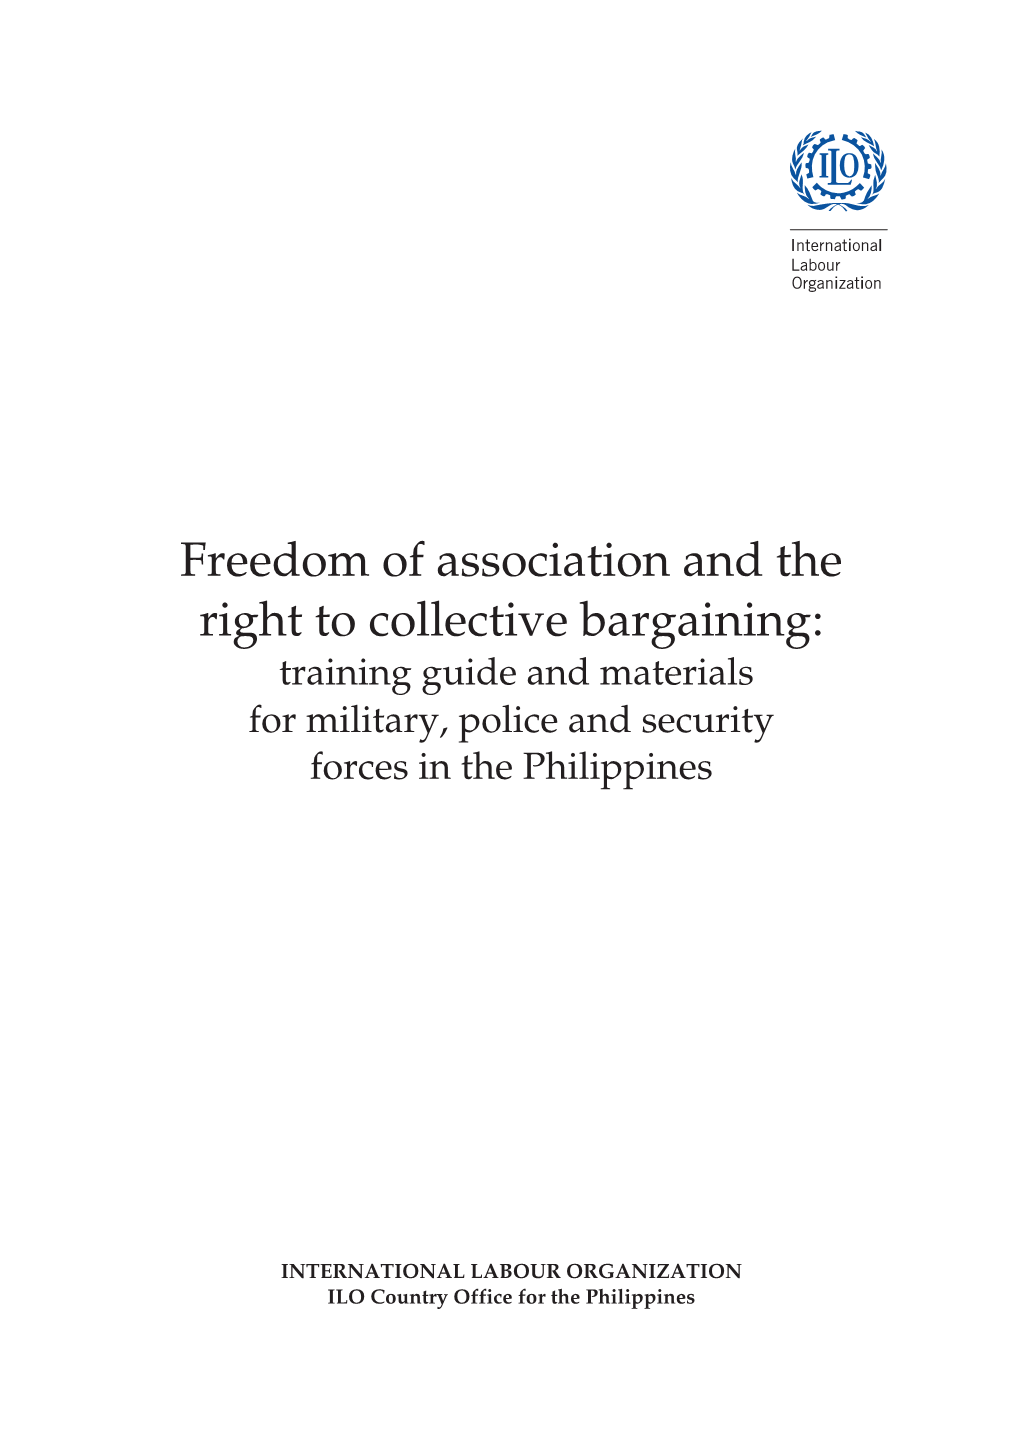 Freedom of Association and the Right to Collective Bargaining: Training Guide and Materials for Military, Police and Security Forces in the Philippines